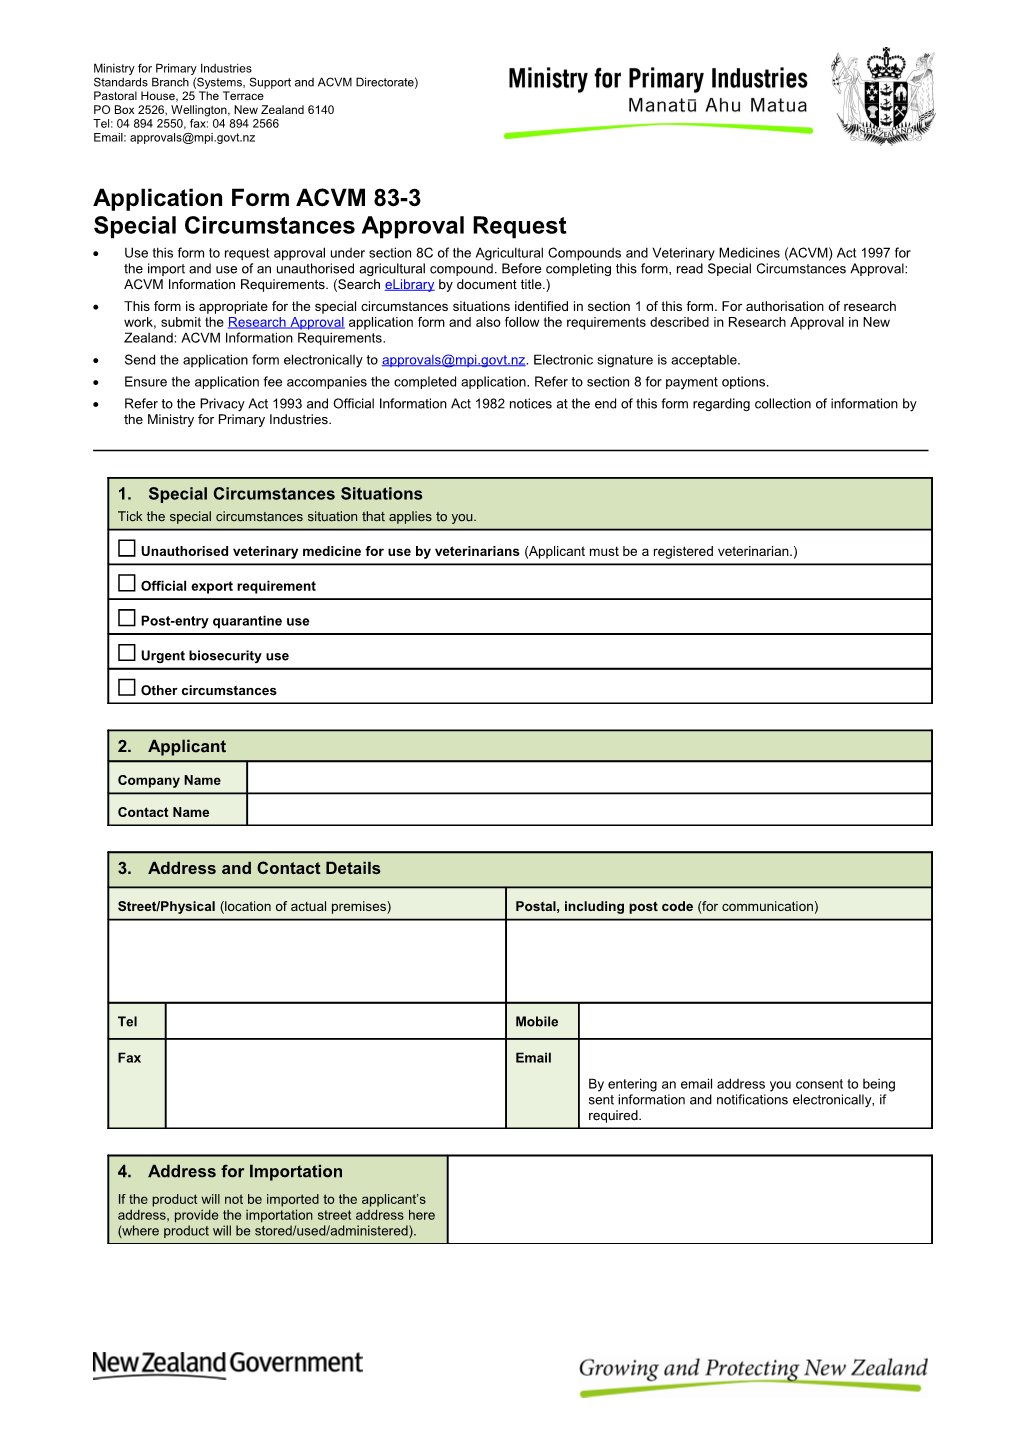 Special Circumstances Approval Request Form